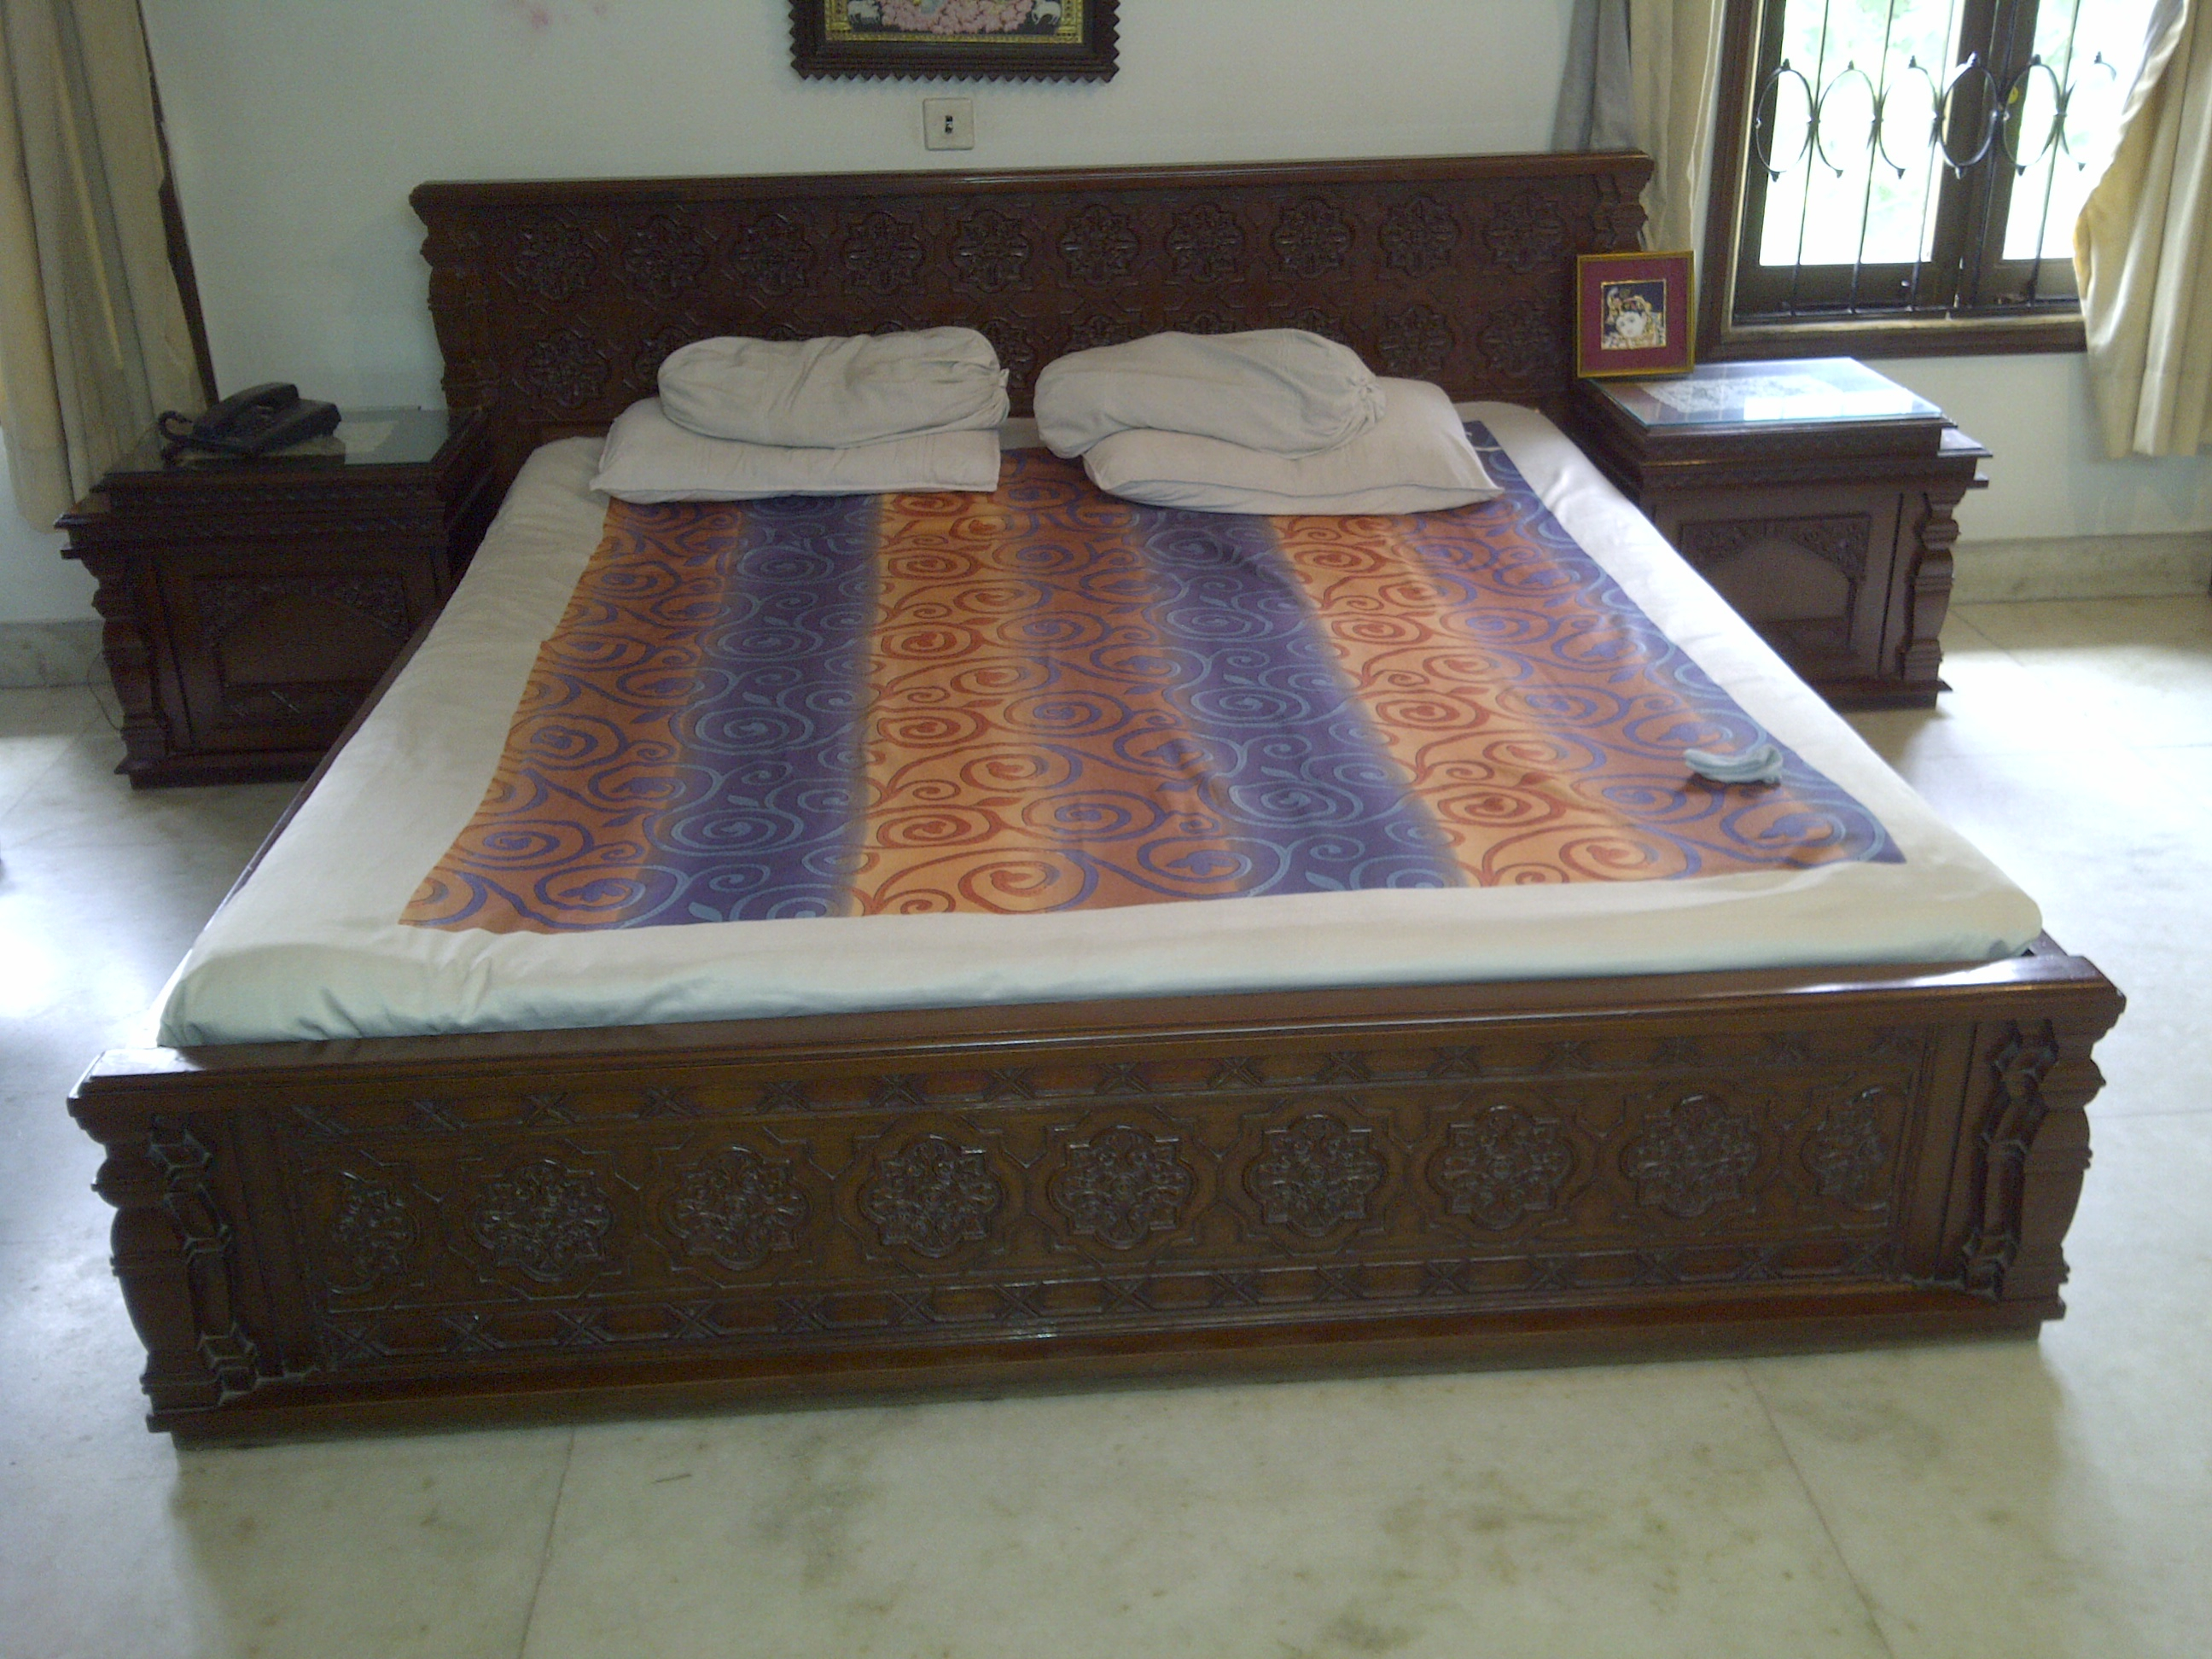 Bedroom Reasonably Priced Bedroom Sets Sell My Second Hand Furniture in size 2592 X 1944